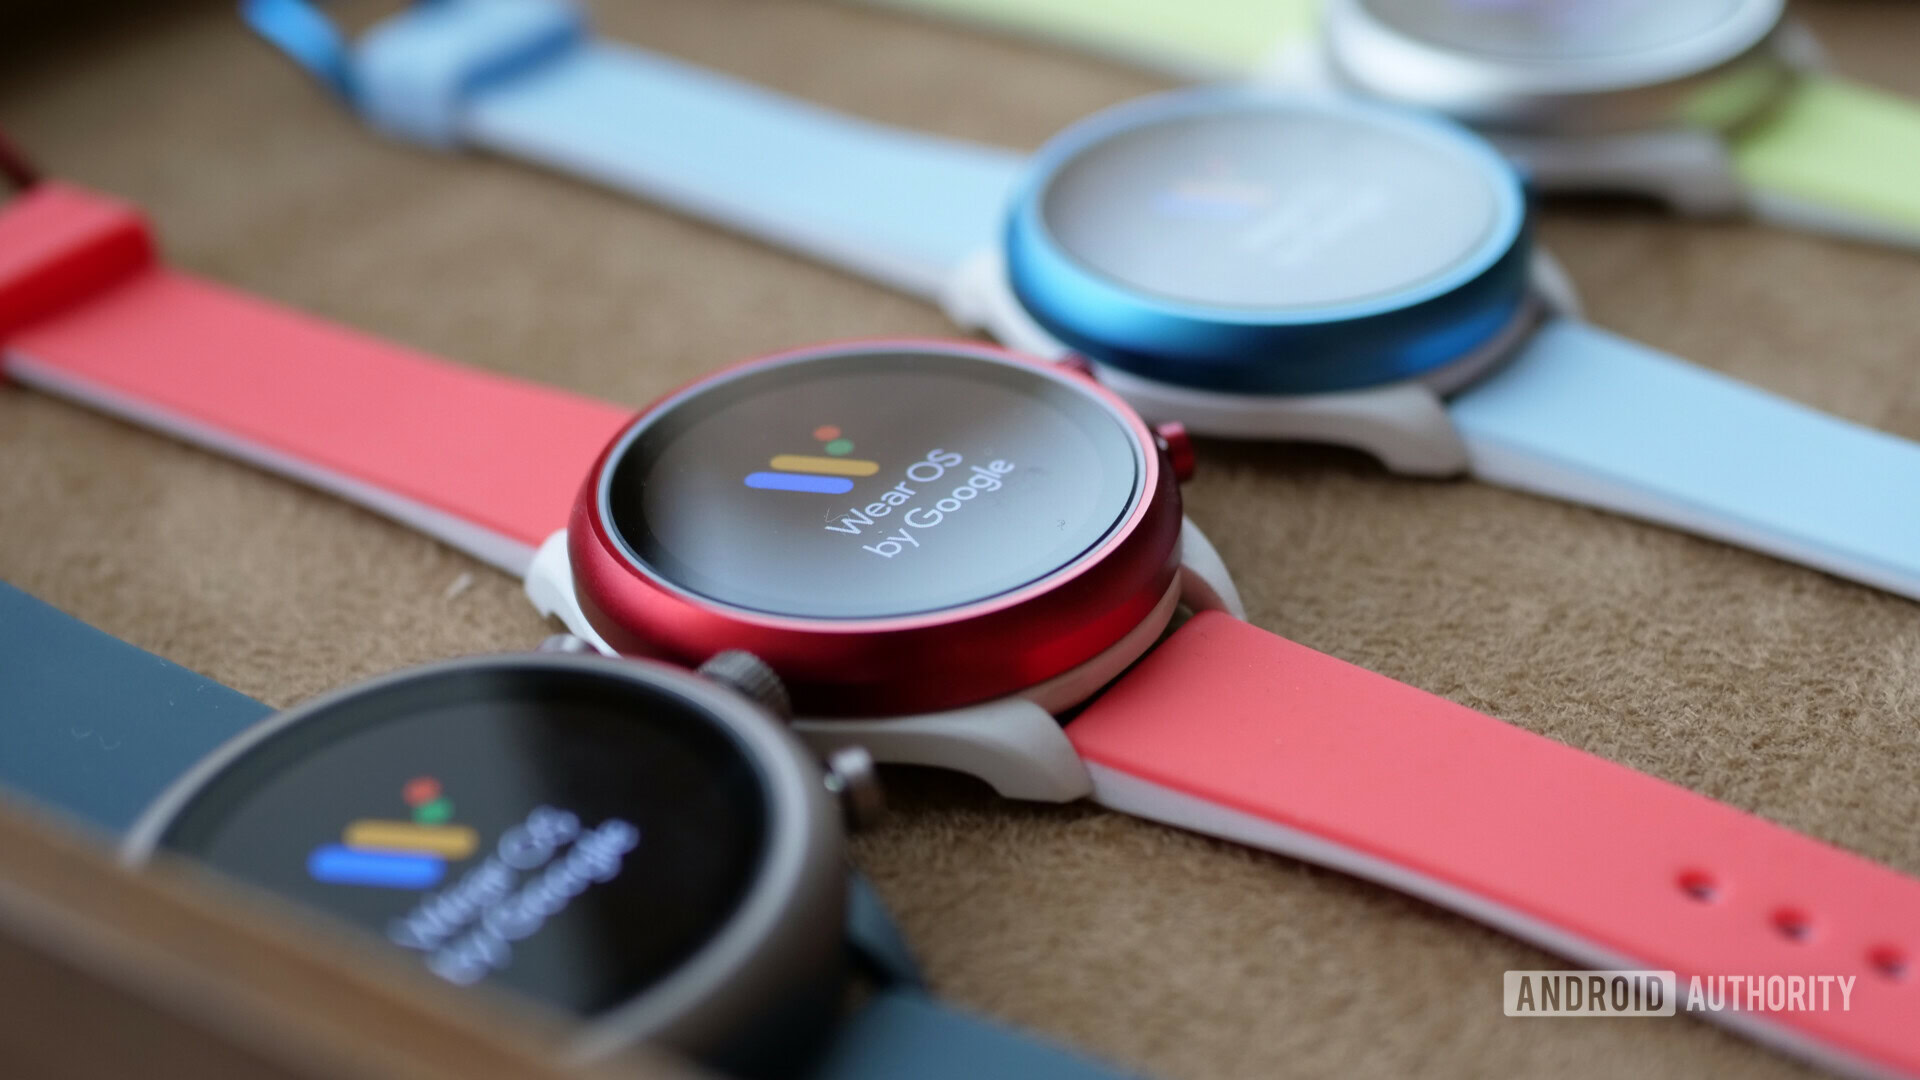 Kate Spade Scallop Smartwatch 2 now features GPS, HR, and Google Pay